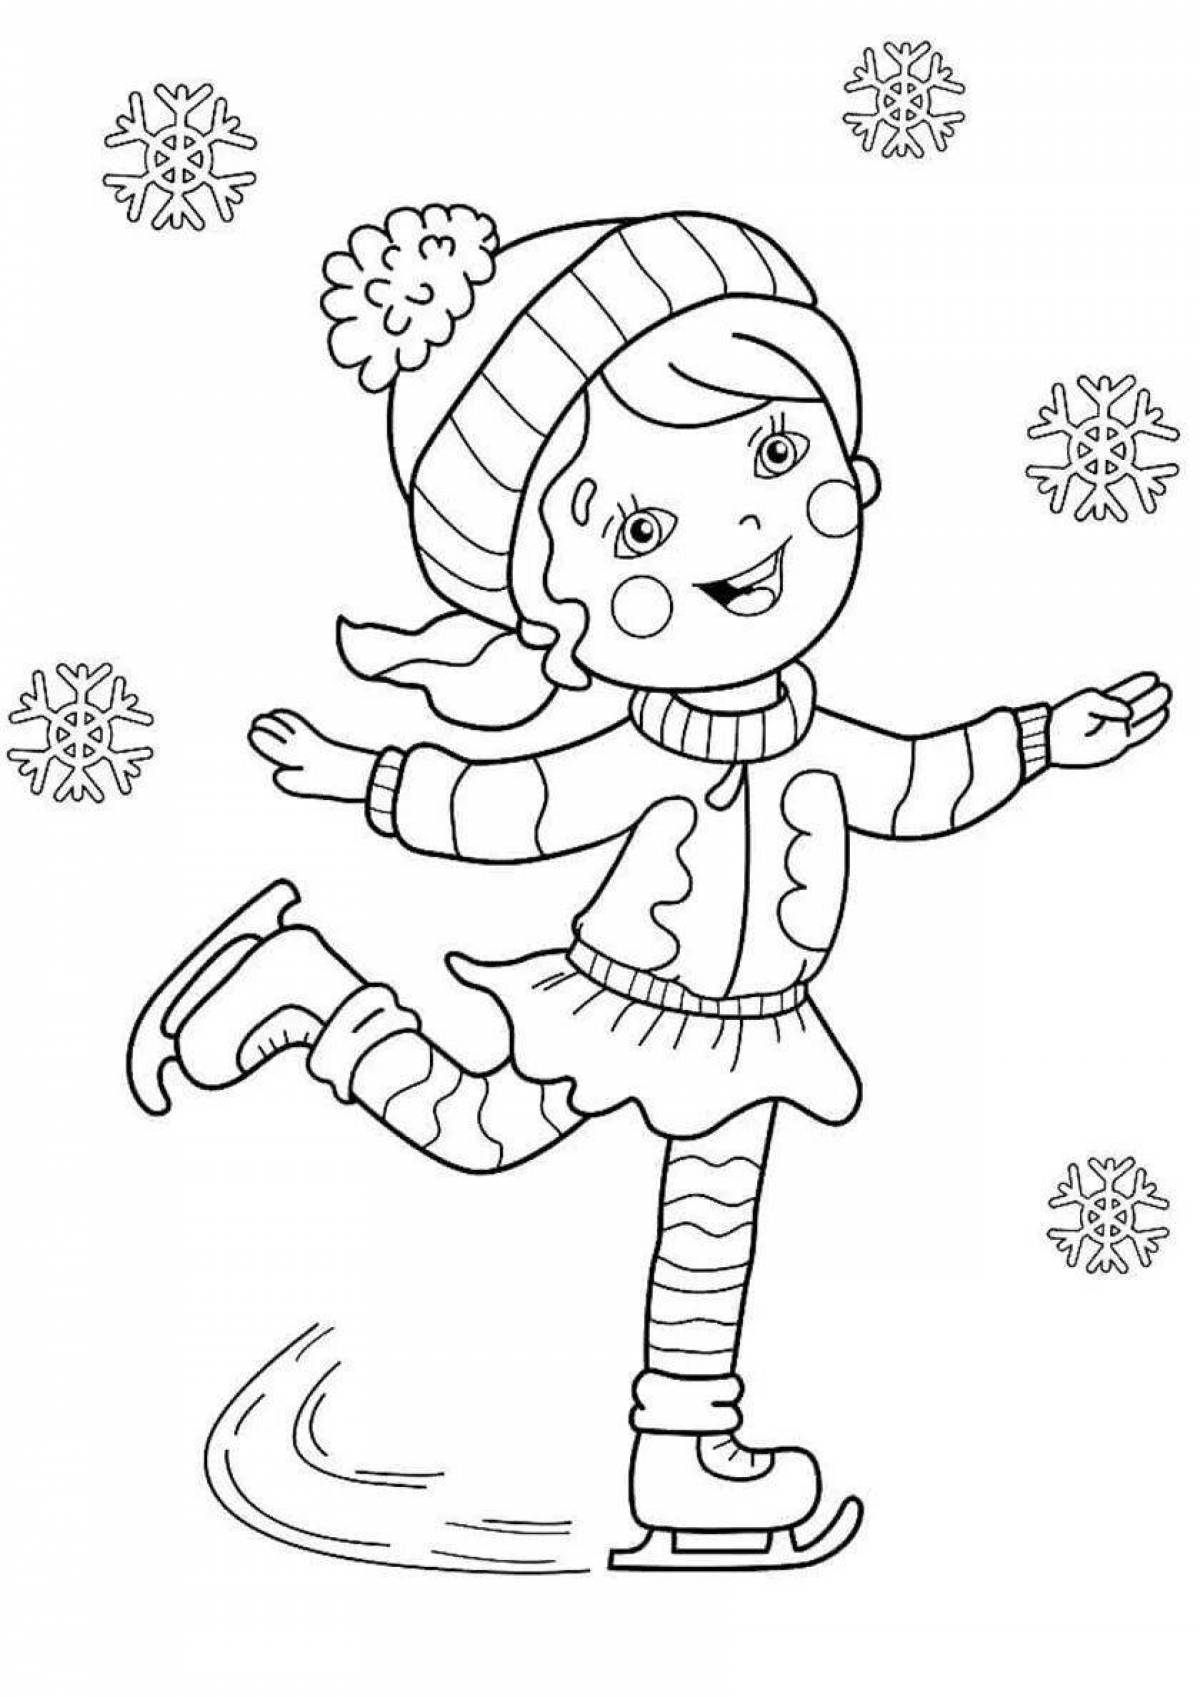 Coloring page funny ice rink